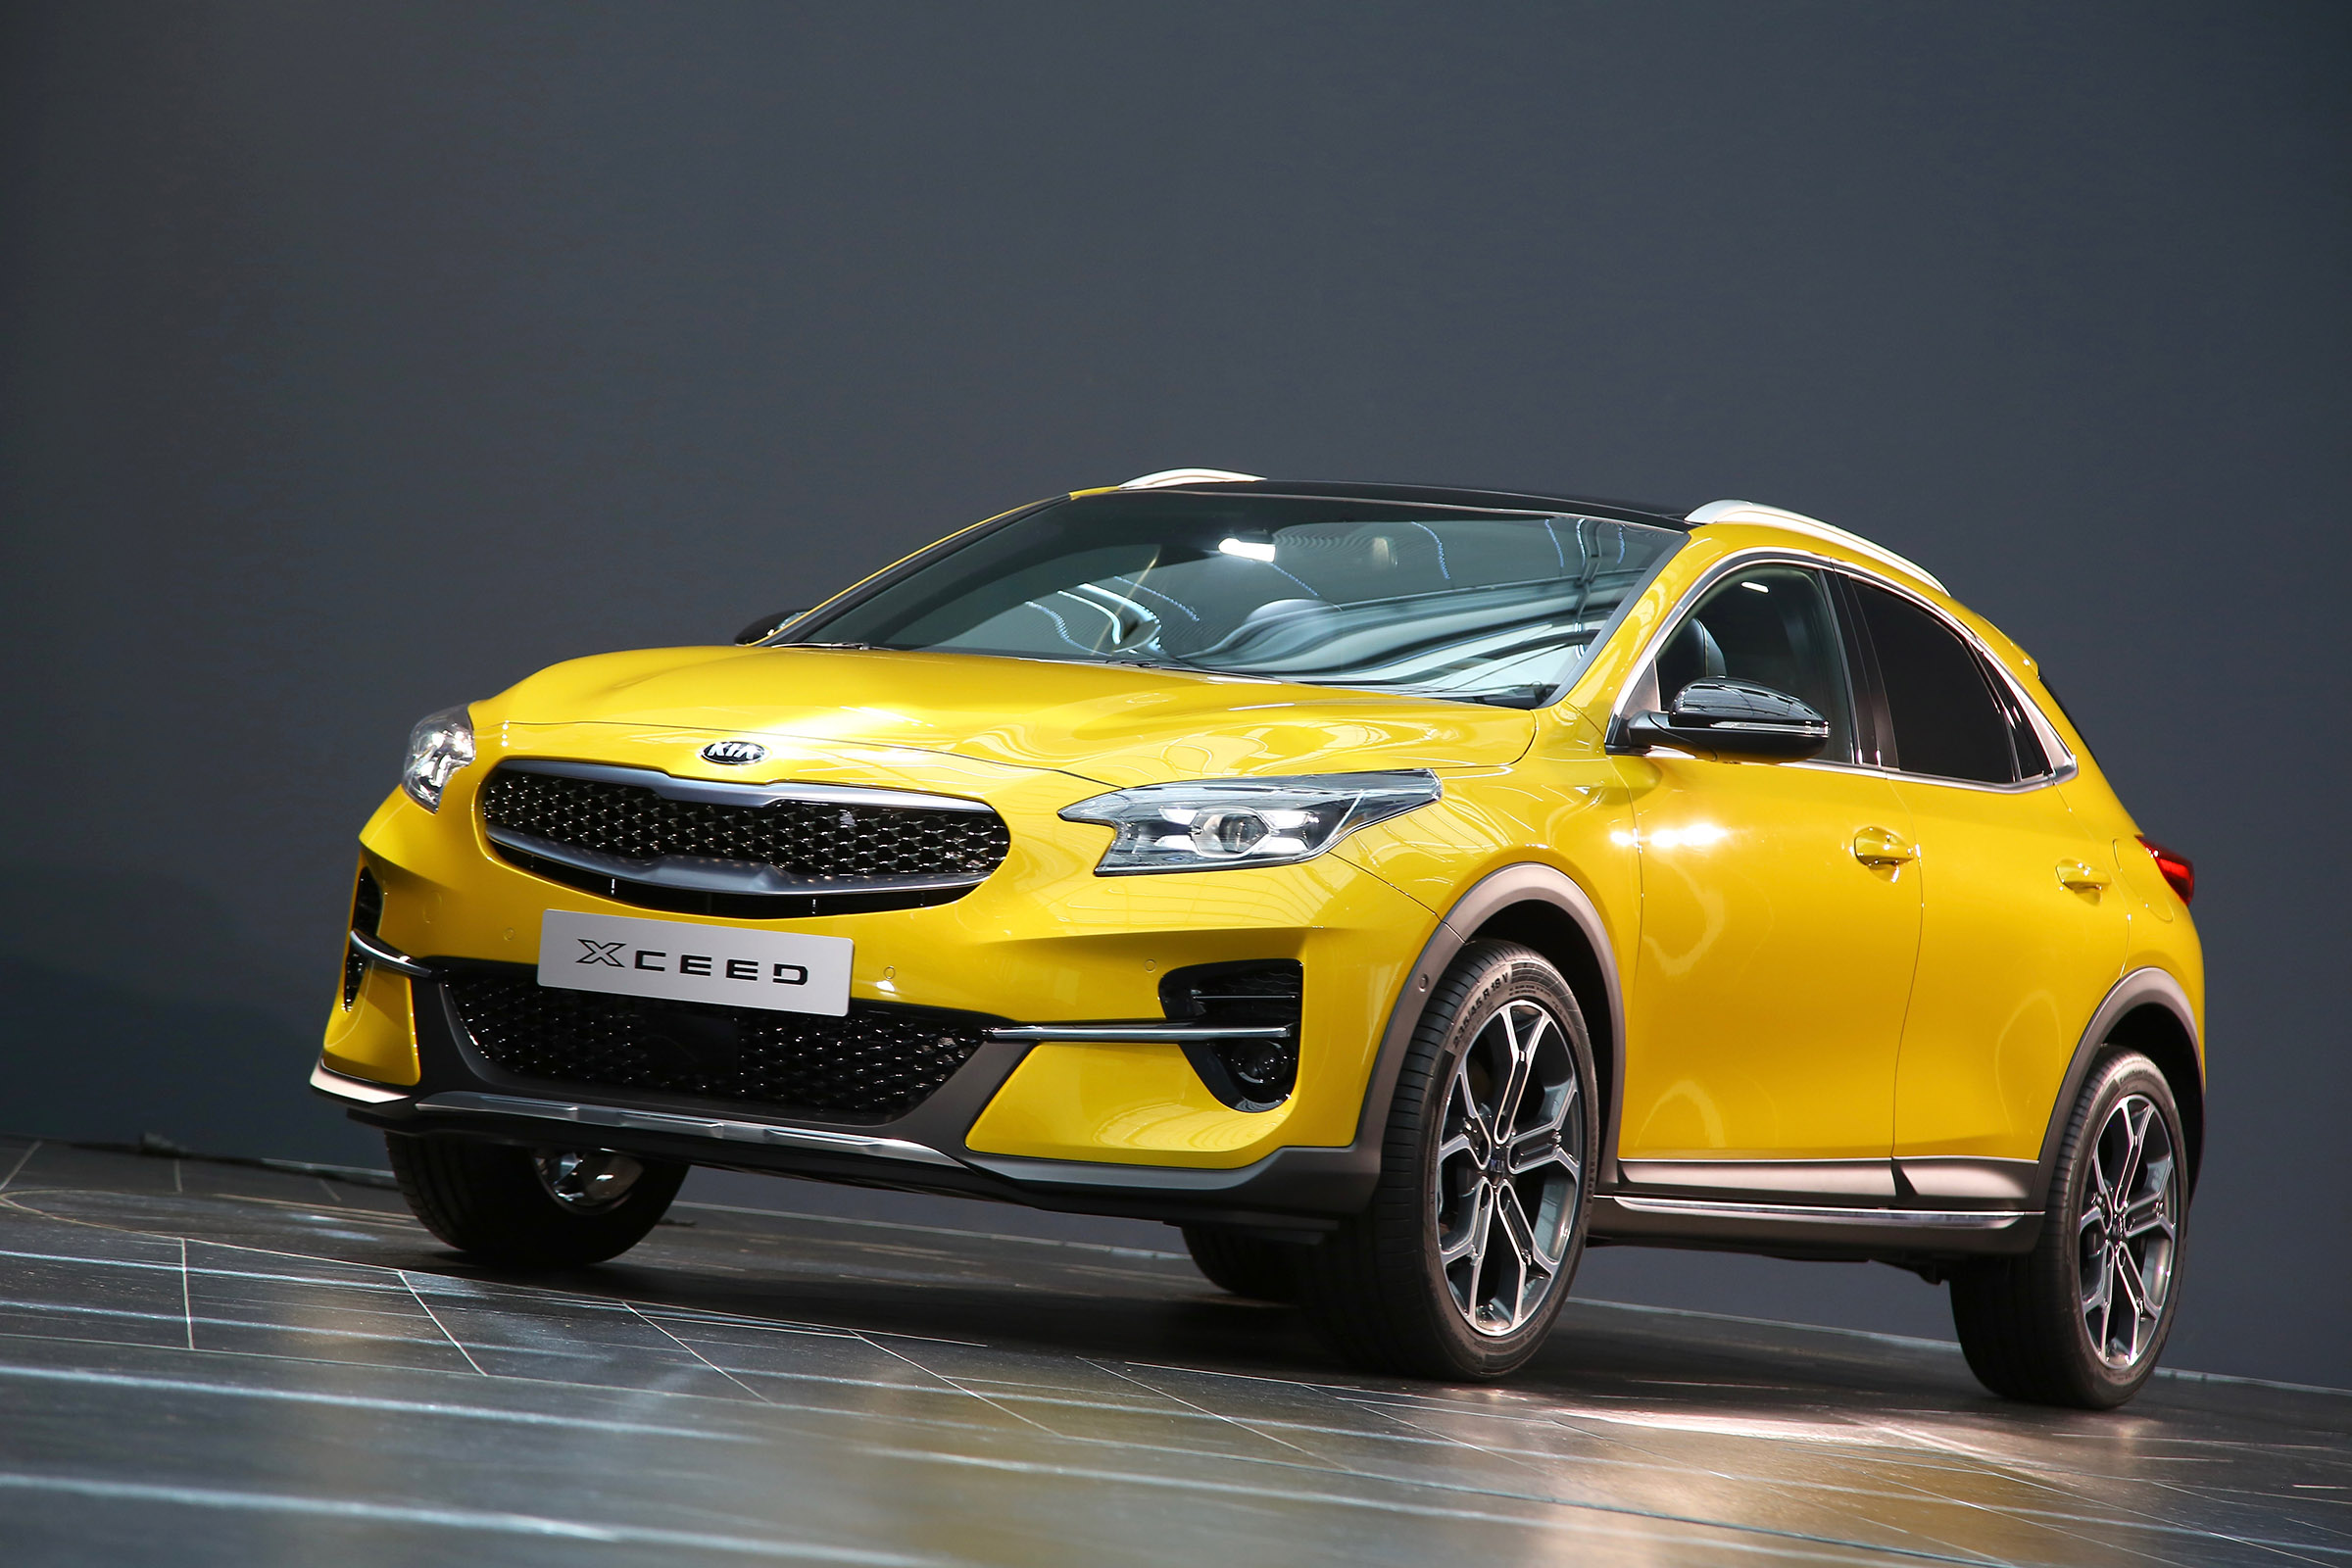 kia models and prices